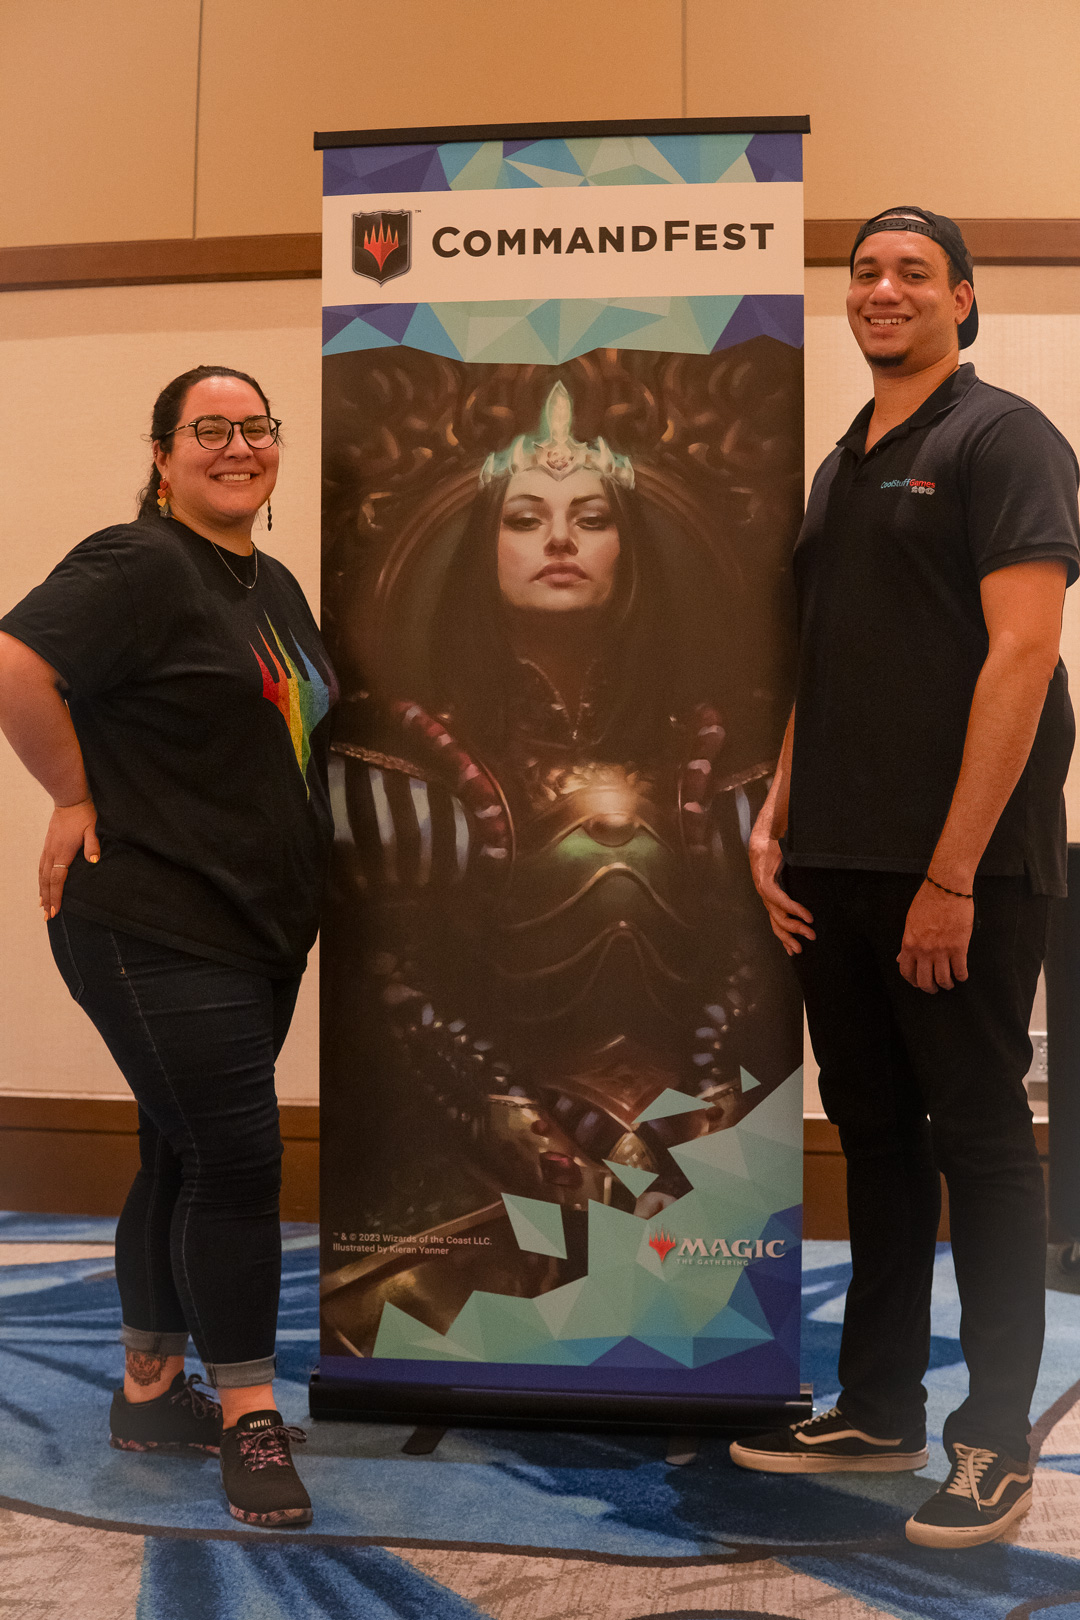 Showrunners Adriana and Jeremy posing in front of CommandFest banner